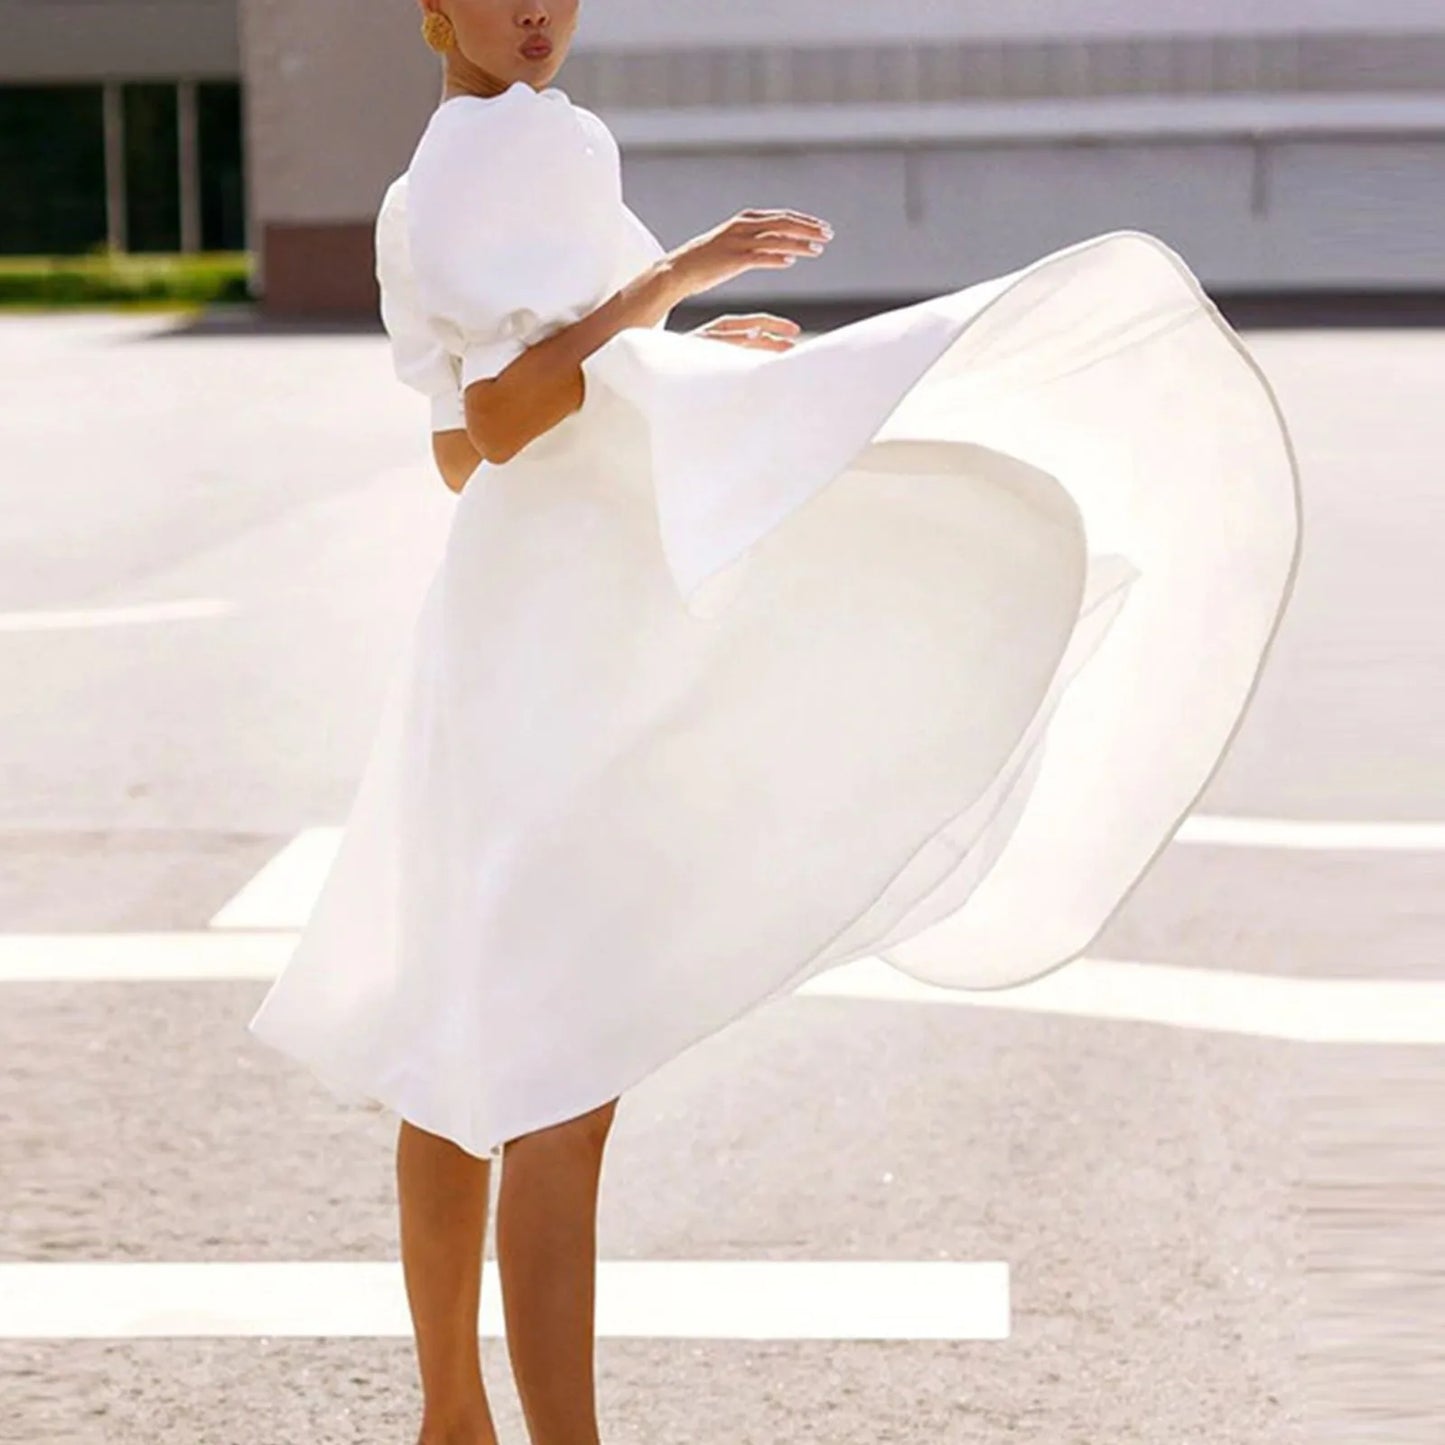 Puff Sleeve Birthday Outfit Tunic Swing Backless Prom Ladies Midi White Dress